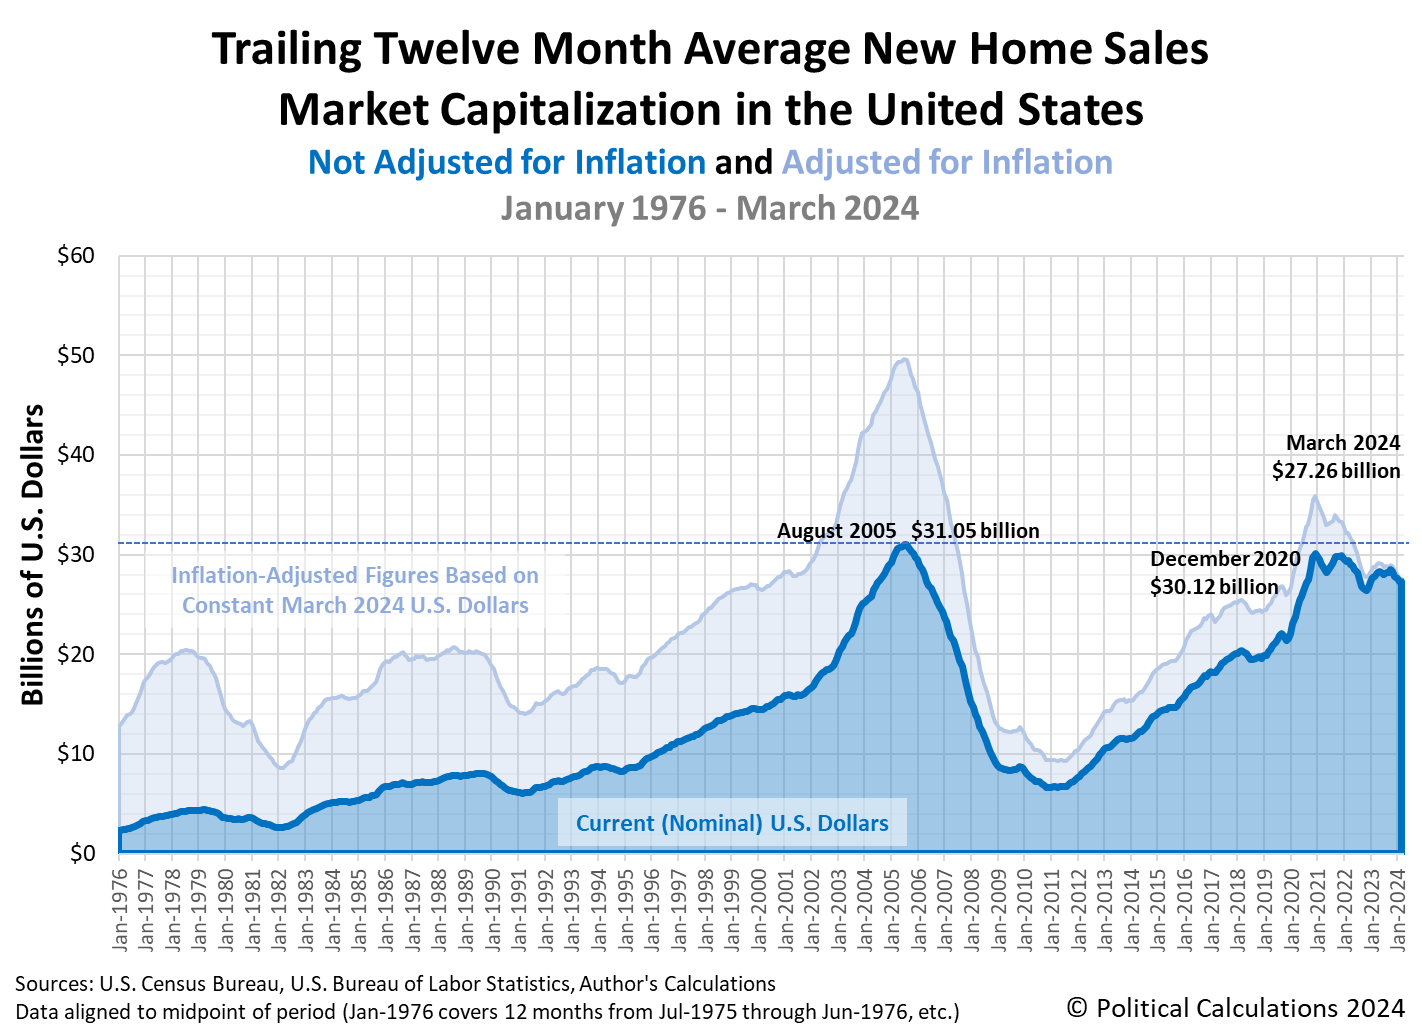 Trailing Twelve Month Average New Home Sales Market Capitalization in the United States, January 1976 - March 2024